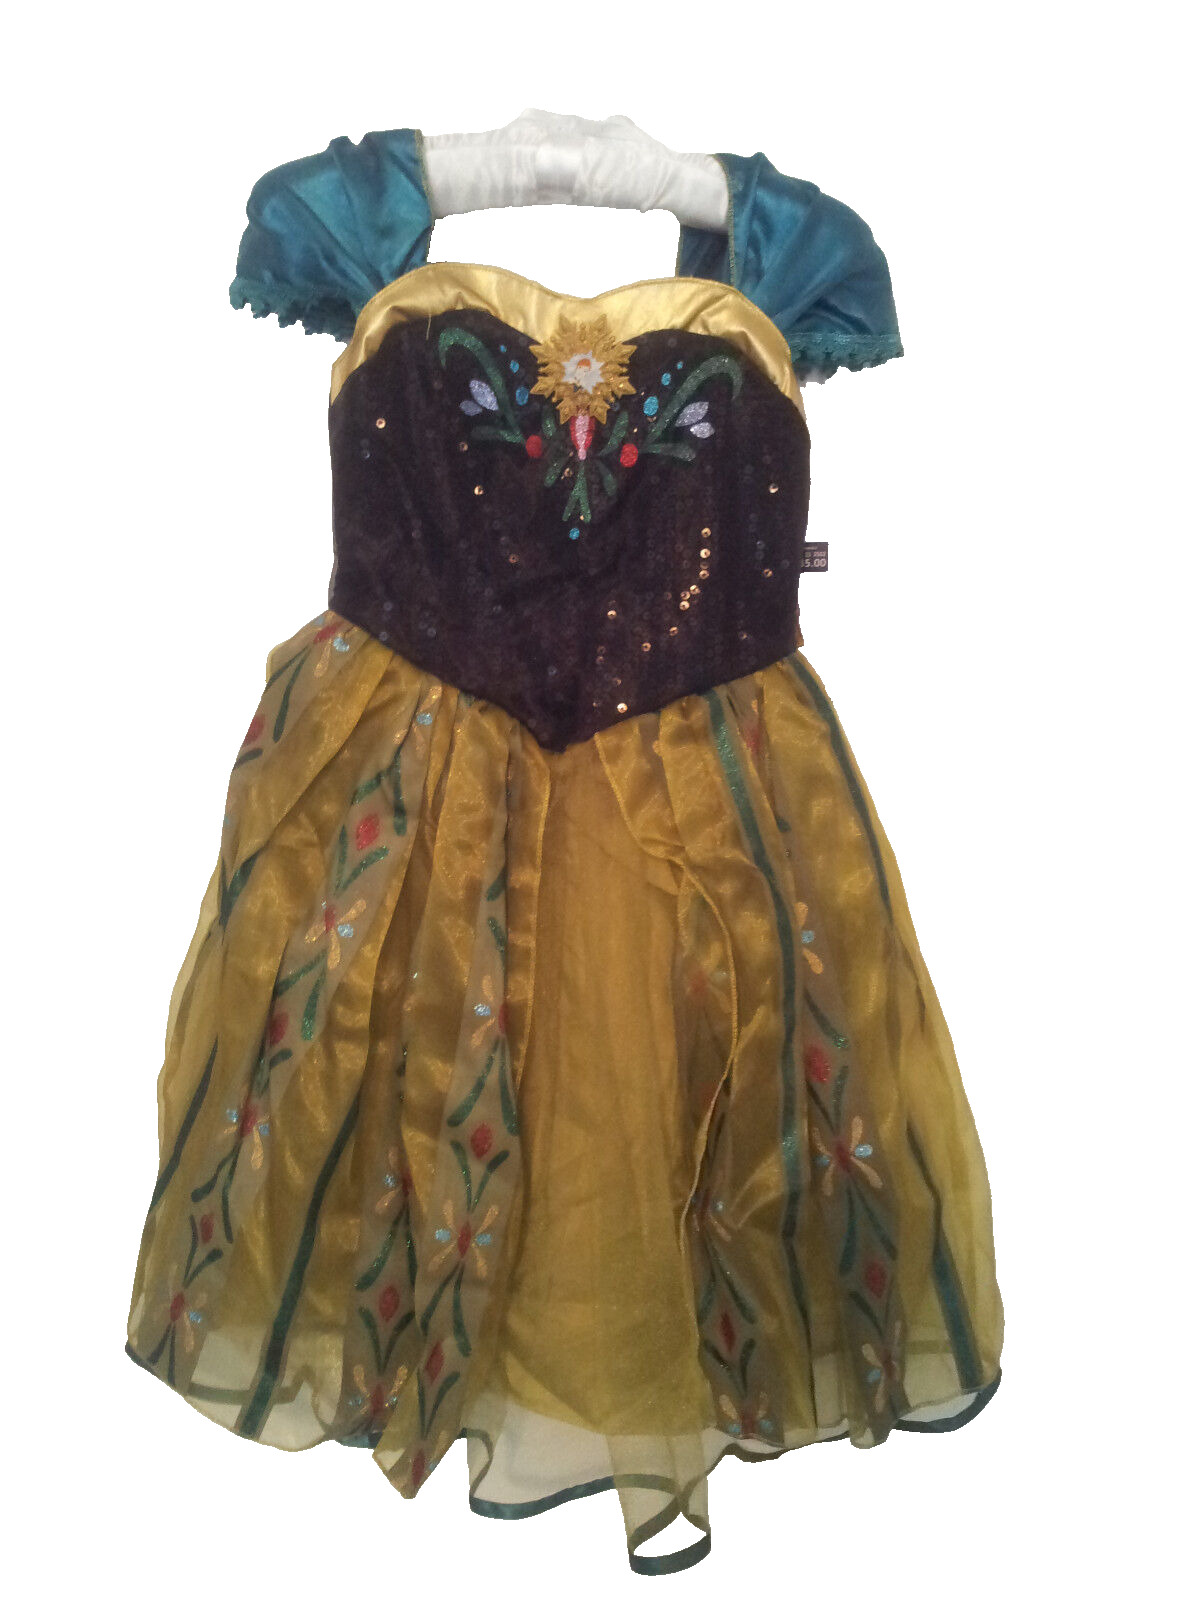 Disney Frozen Princess Anna Deluxe Coronation Dress with Cameo Size (4-6X) NEW